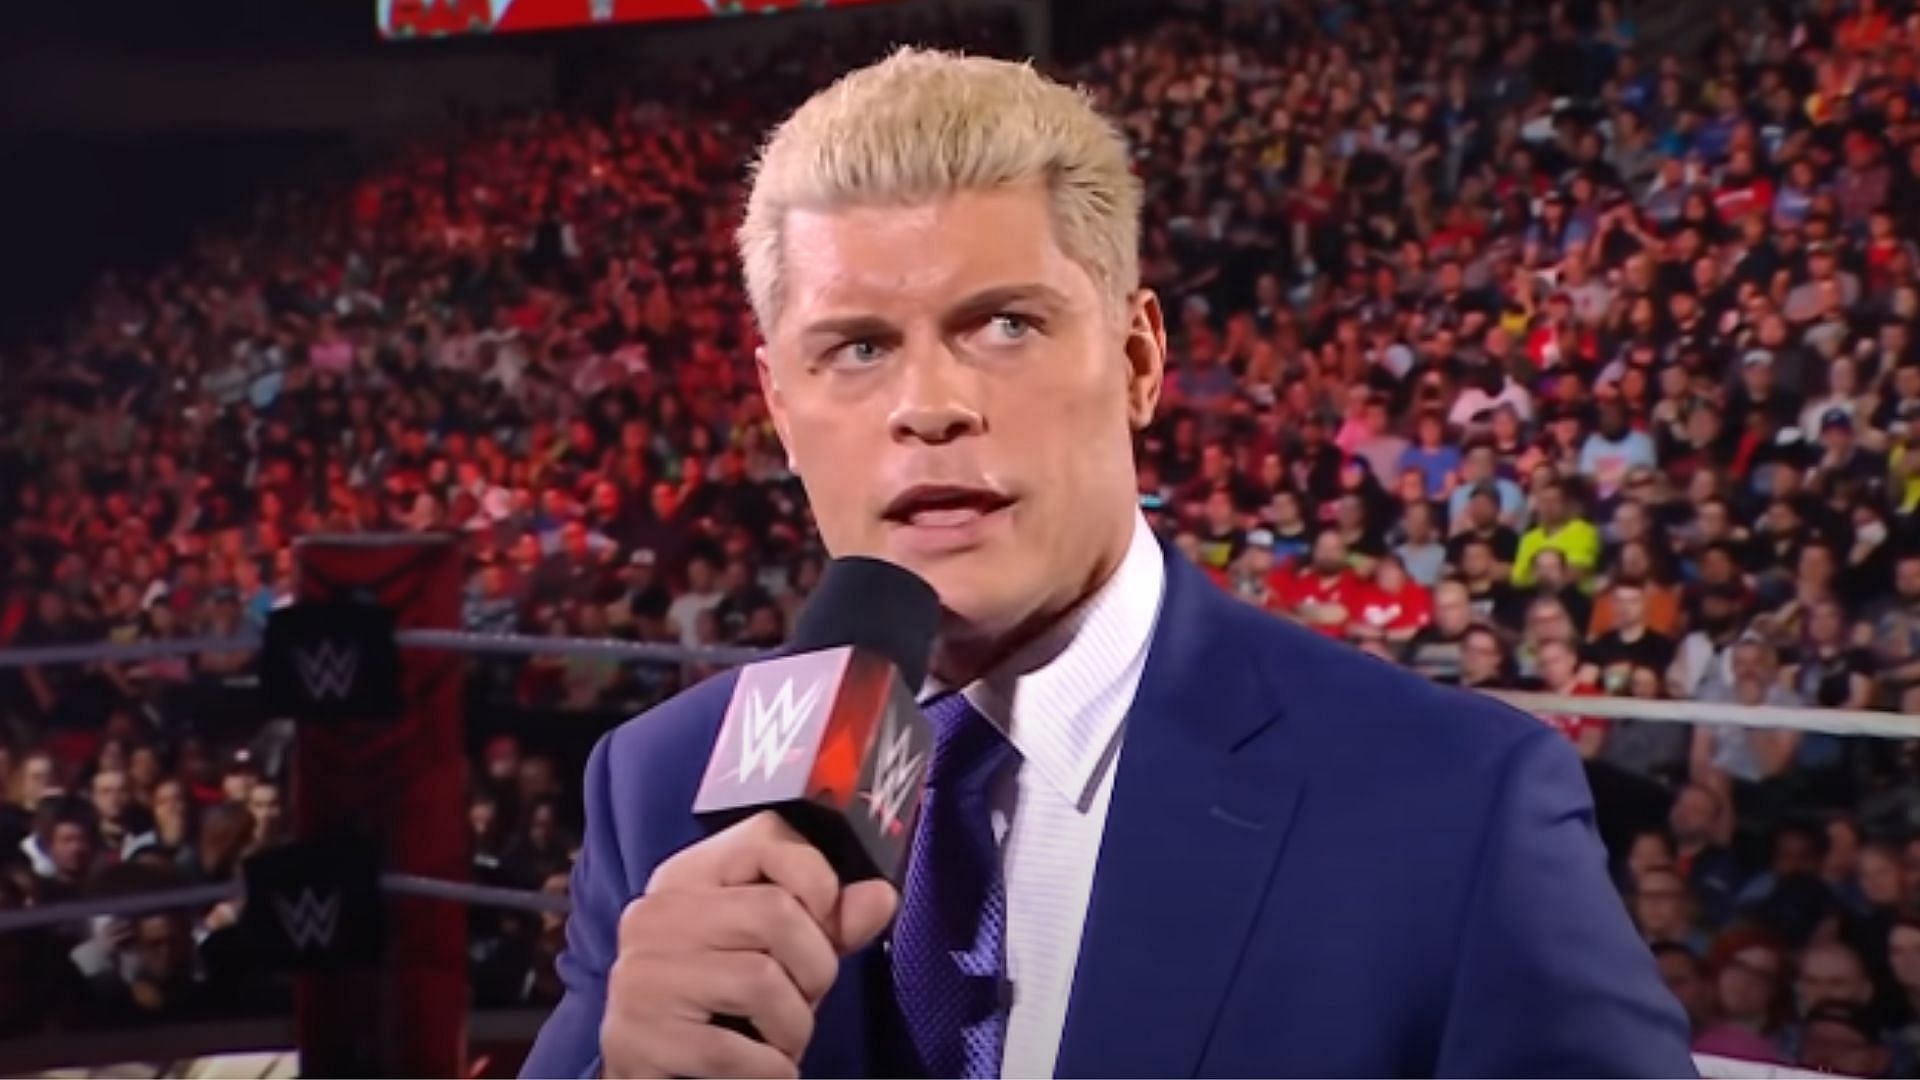 Cody Rhodes recently lost to Roman Reigns at WrestleMania 39